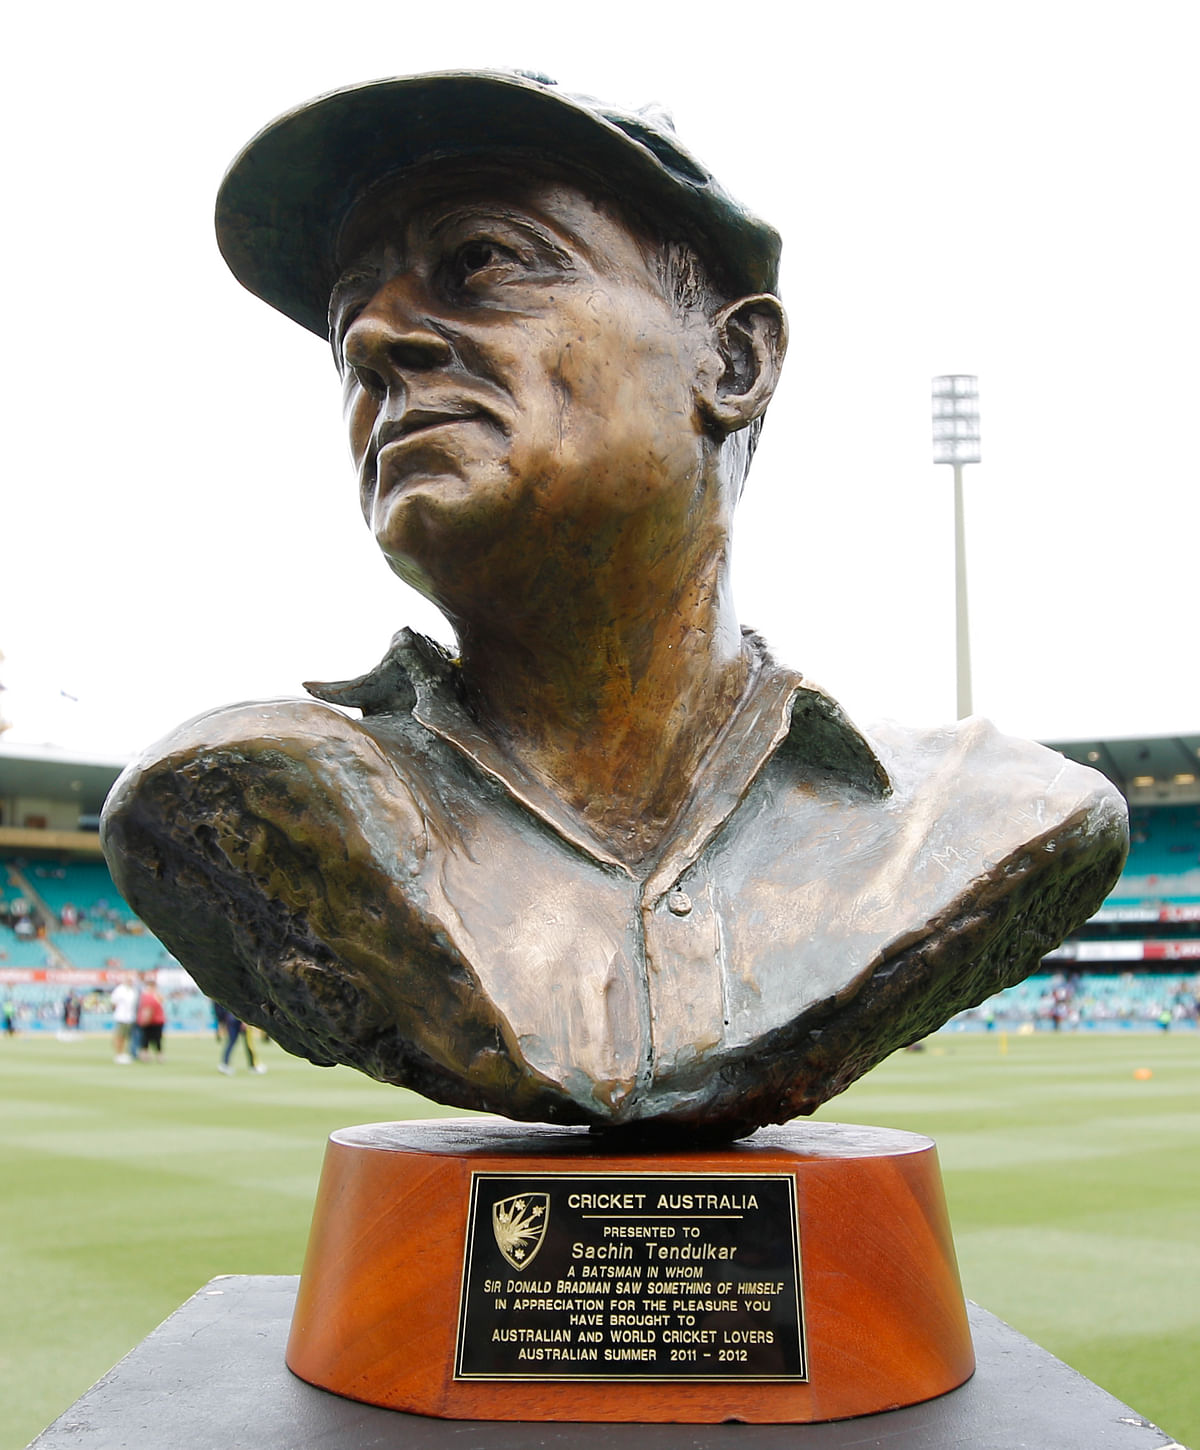 A bust of the late Sir Don Bradman was presented to Sachin Tendulkar by Cricket Australia in 2012.(Photo: Reuters)